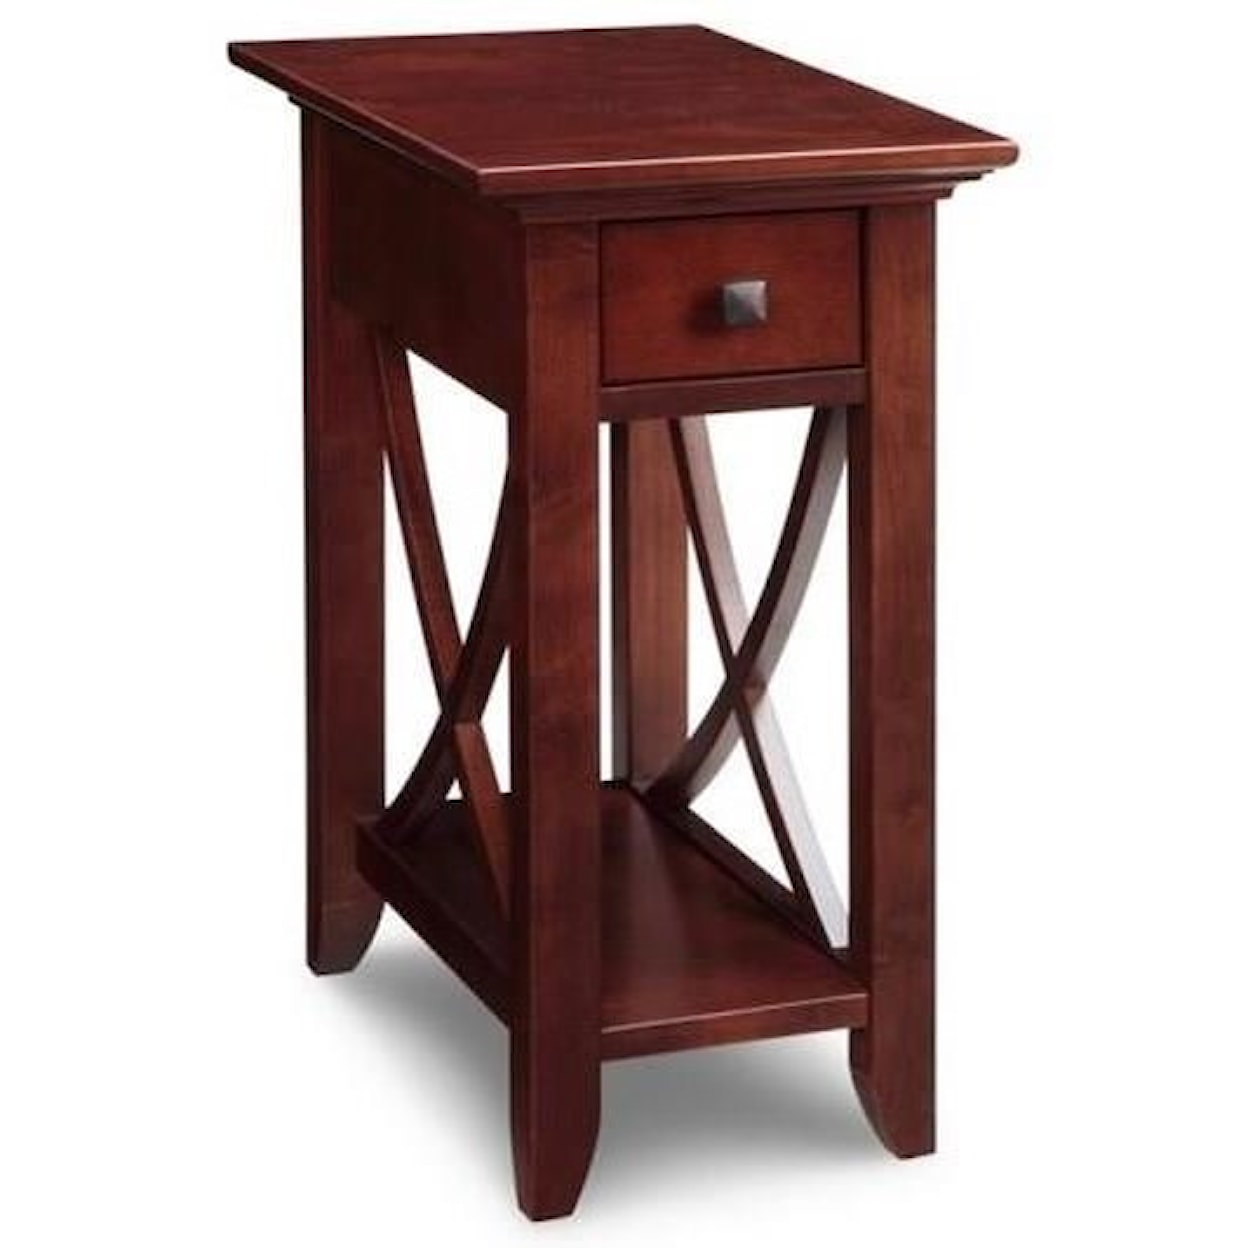 Handstone Florence Chair Side Table with Drawer